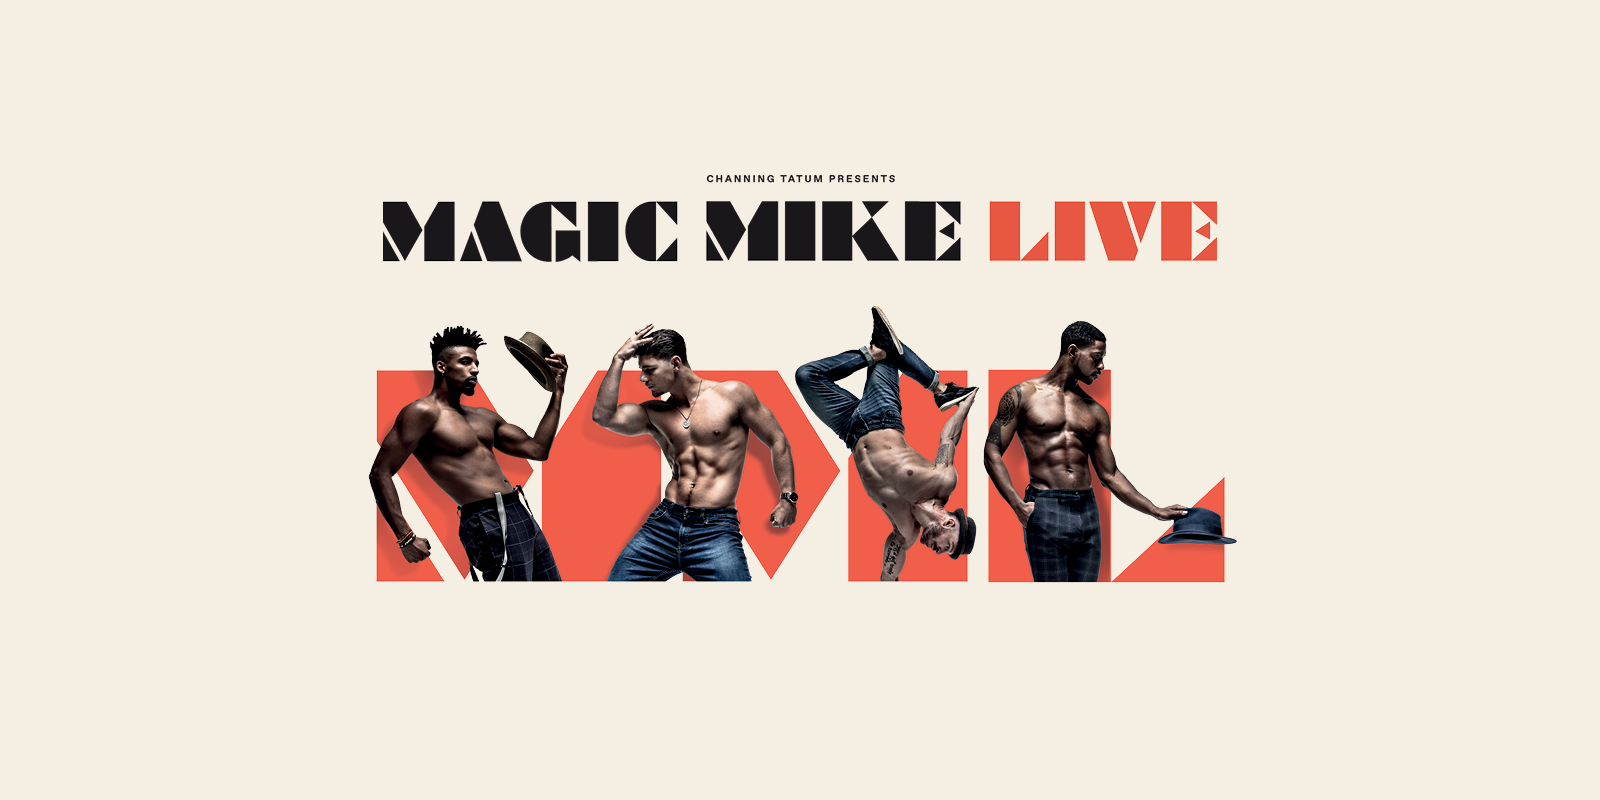 Shirtless Magic Mike Live performers in different poses